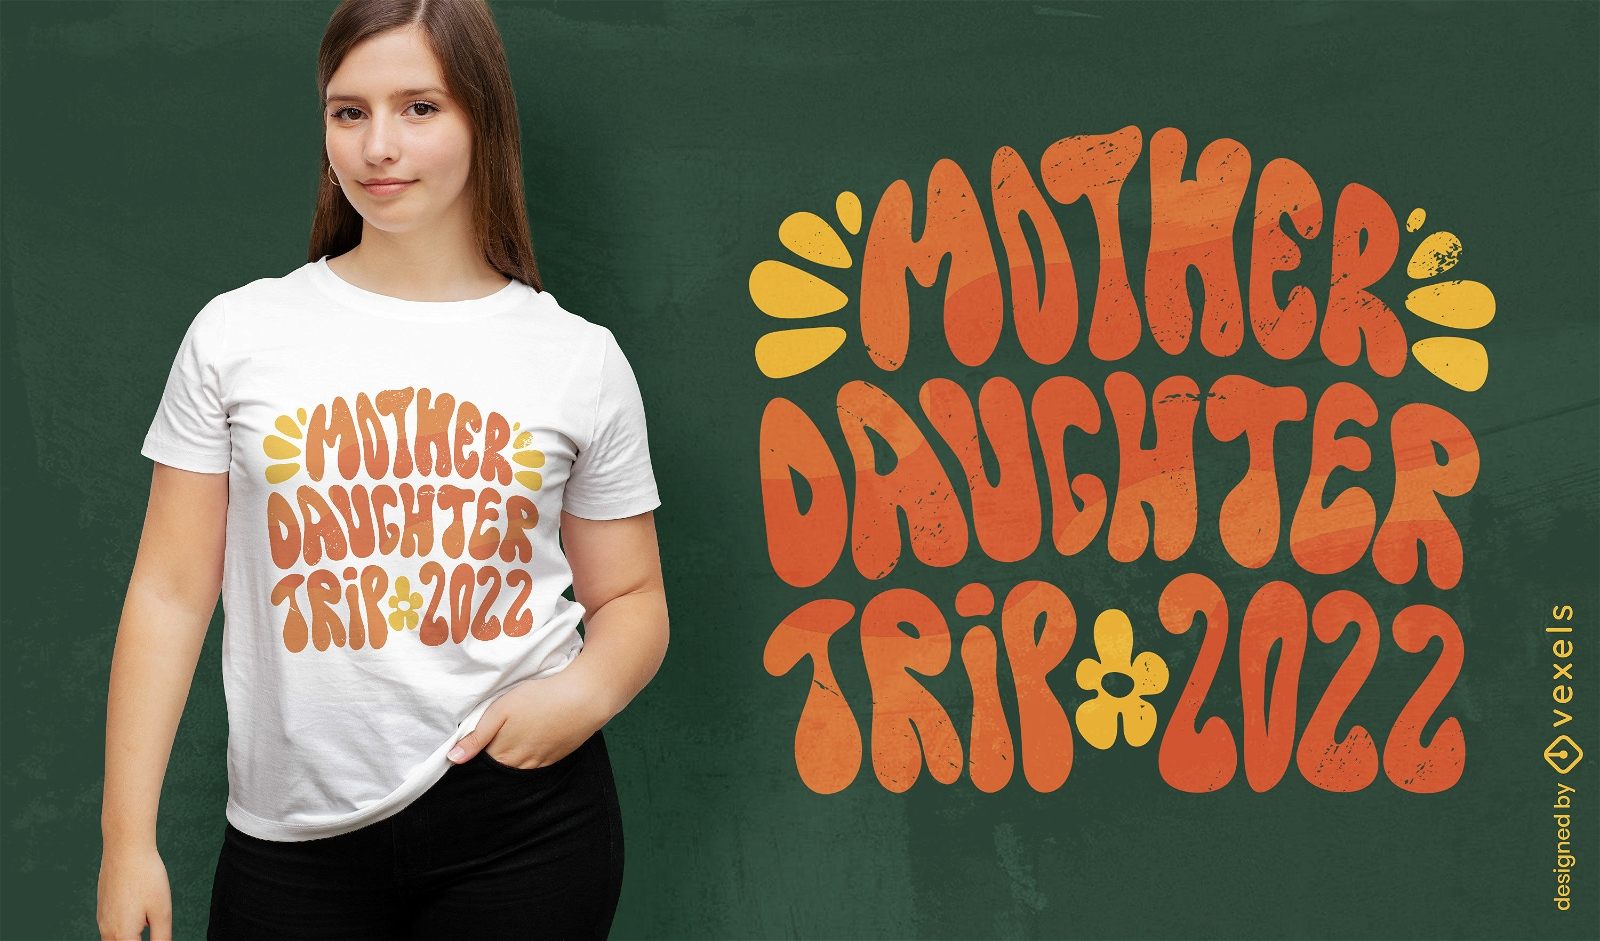 Mother daughter groovy quote t-shirt design